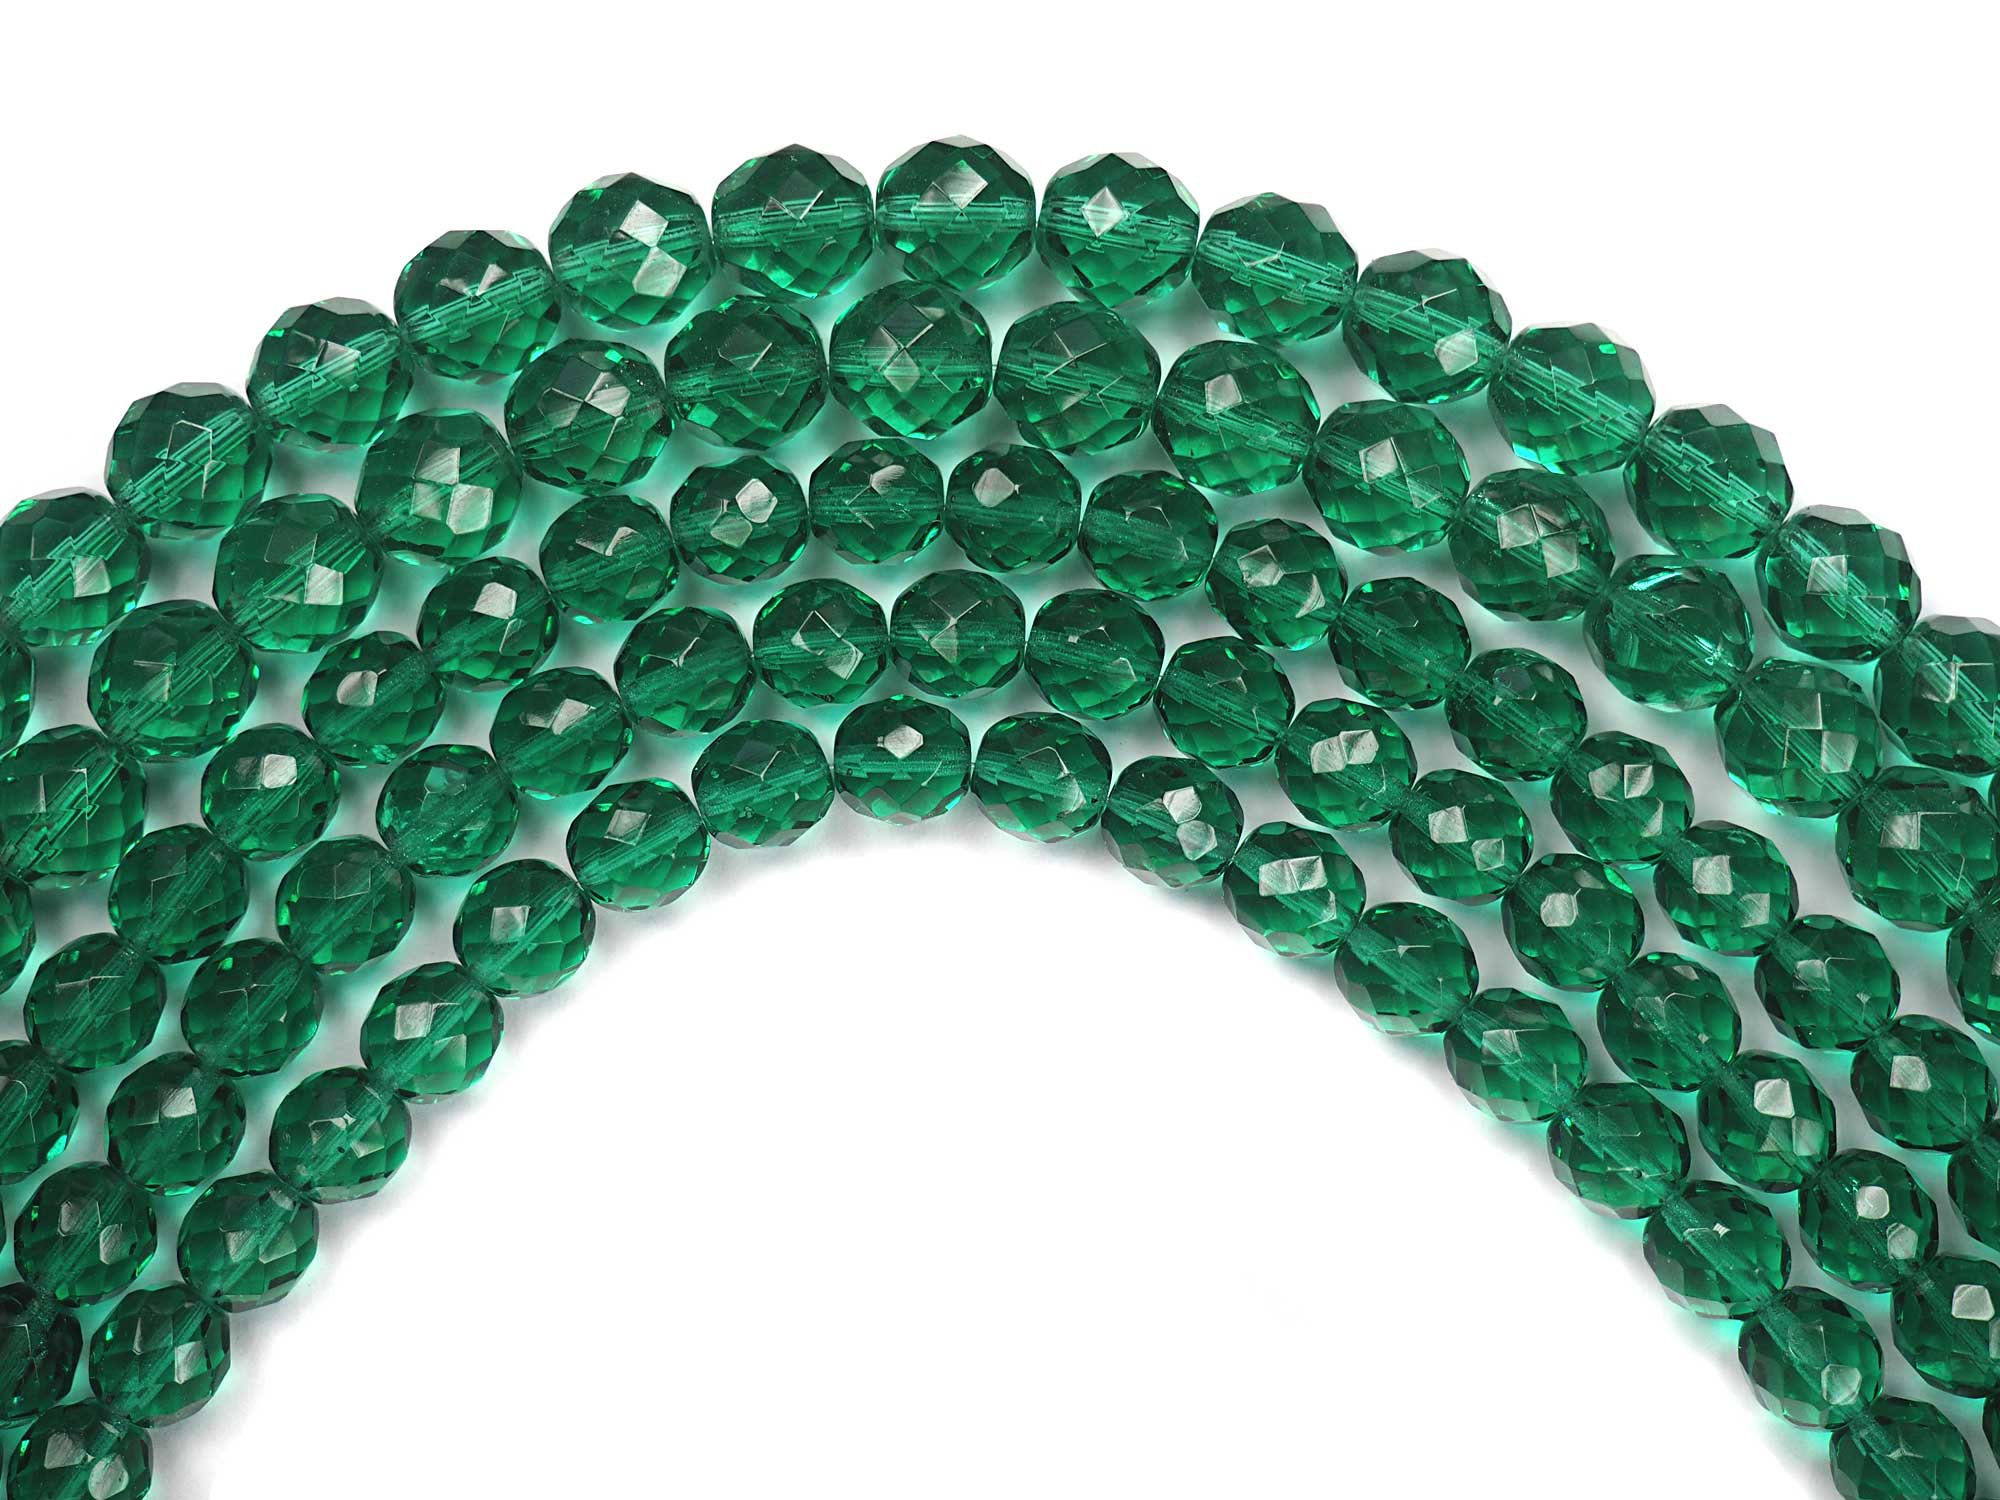 Light Emerald, Czech Fire Polished Round Faceted Glass Beads, 16 inch strand, lt.green